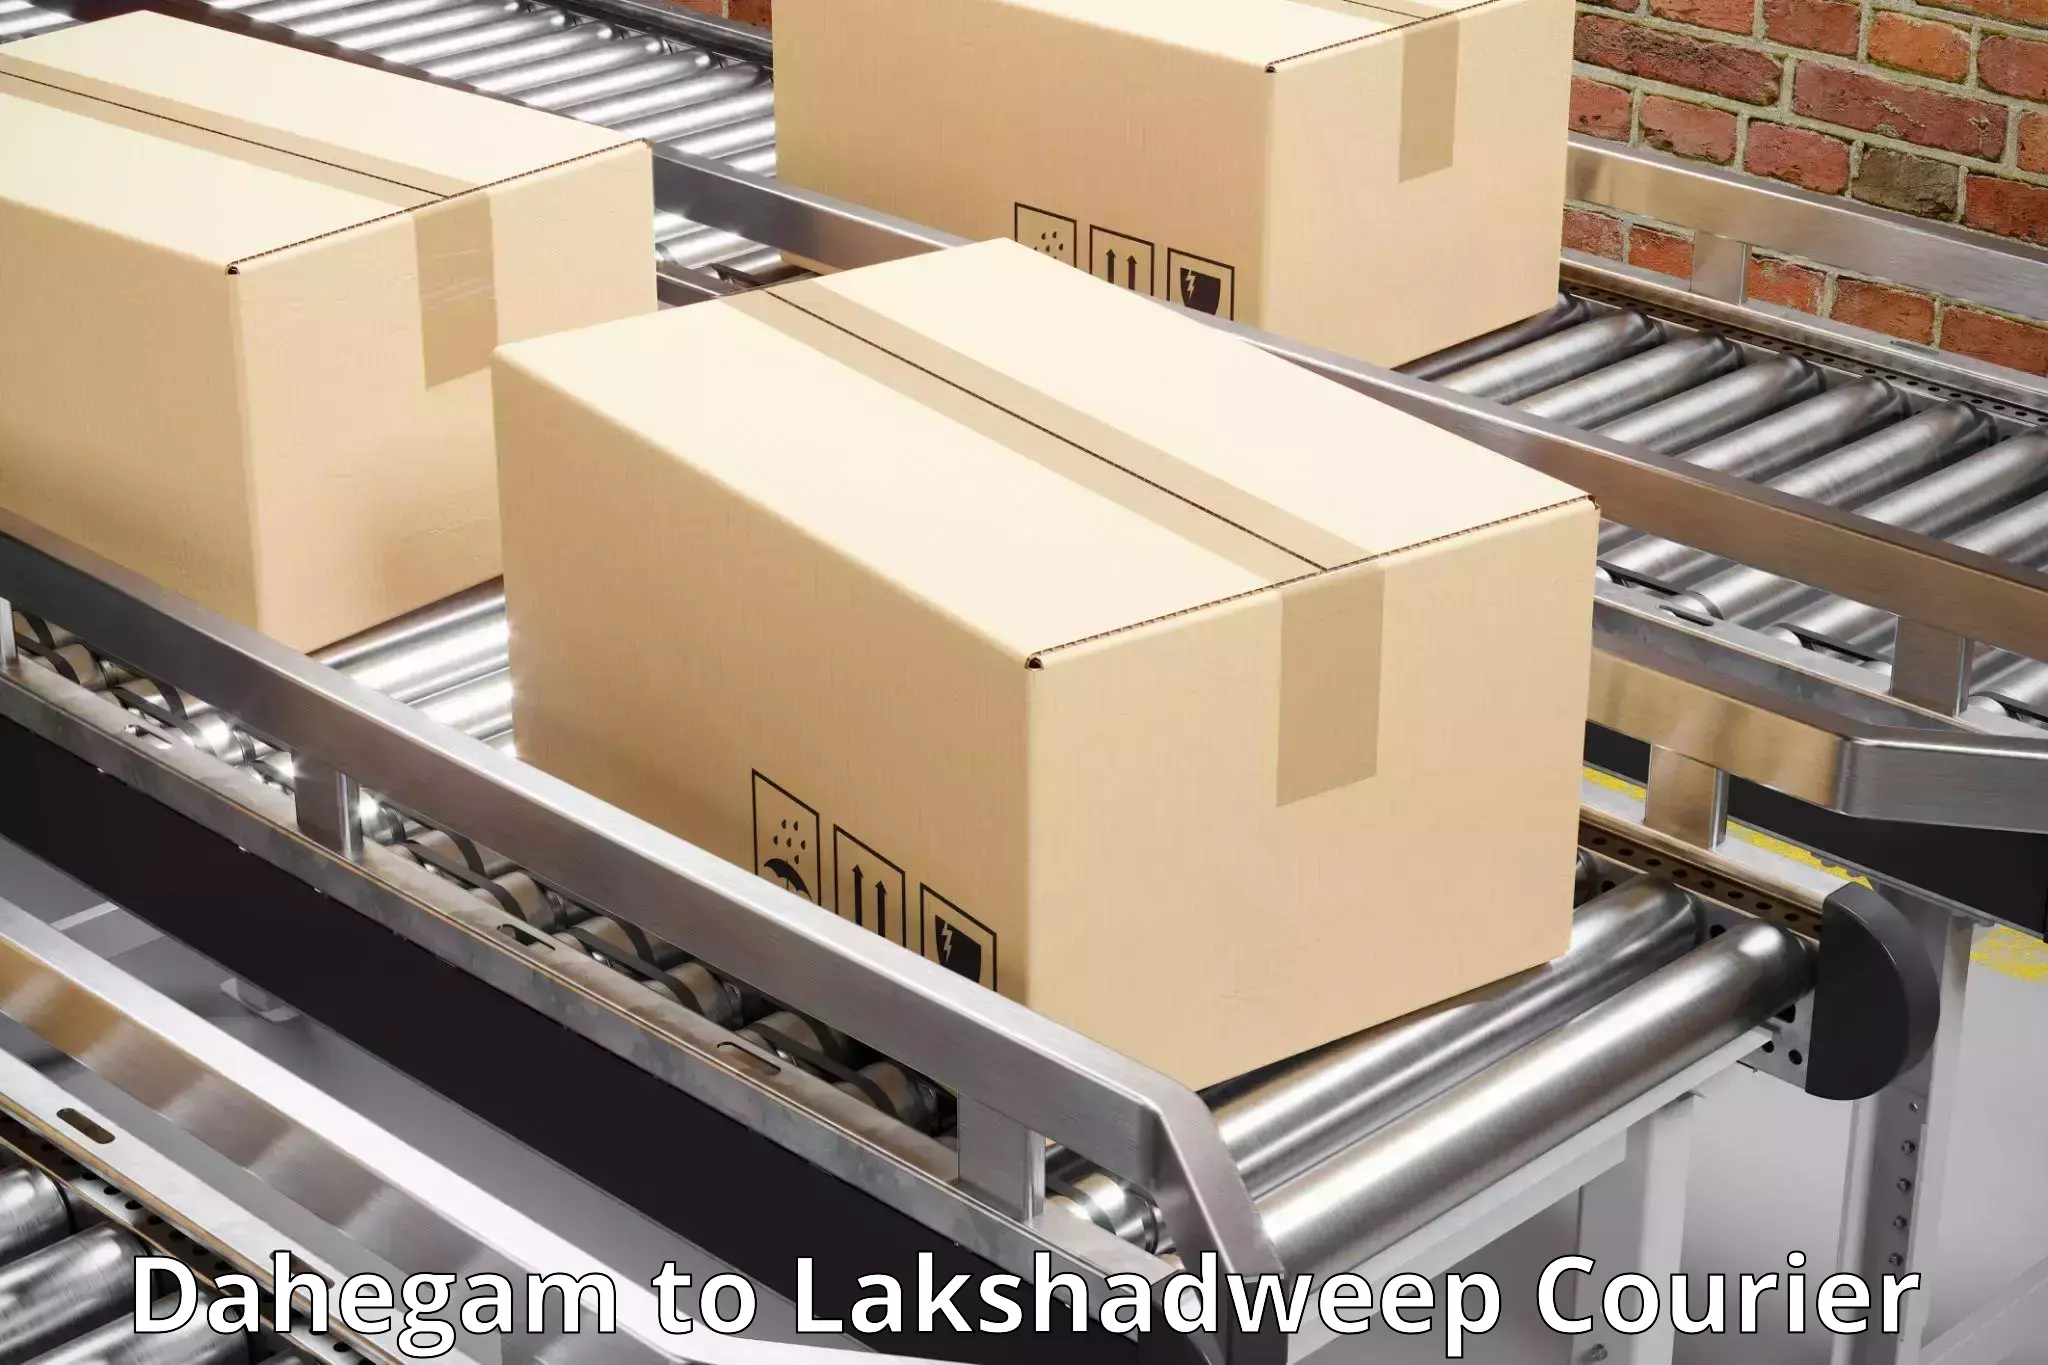 Overnight delivery services Dahegam to Lakshadweep